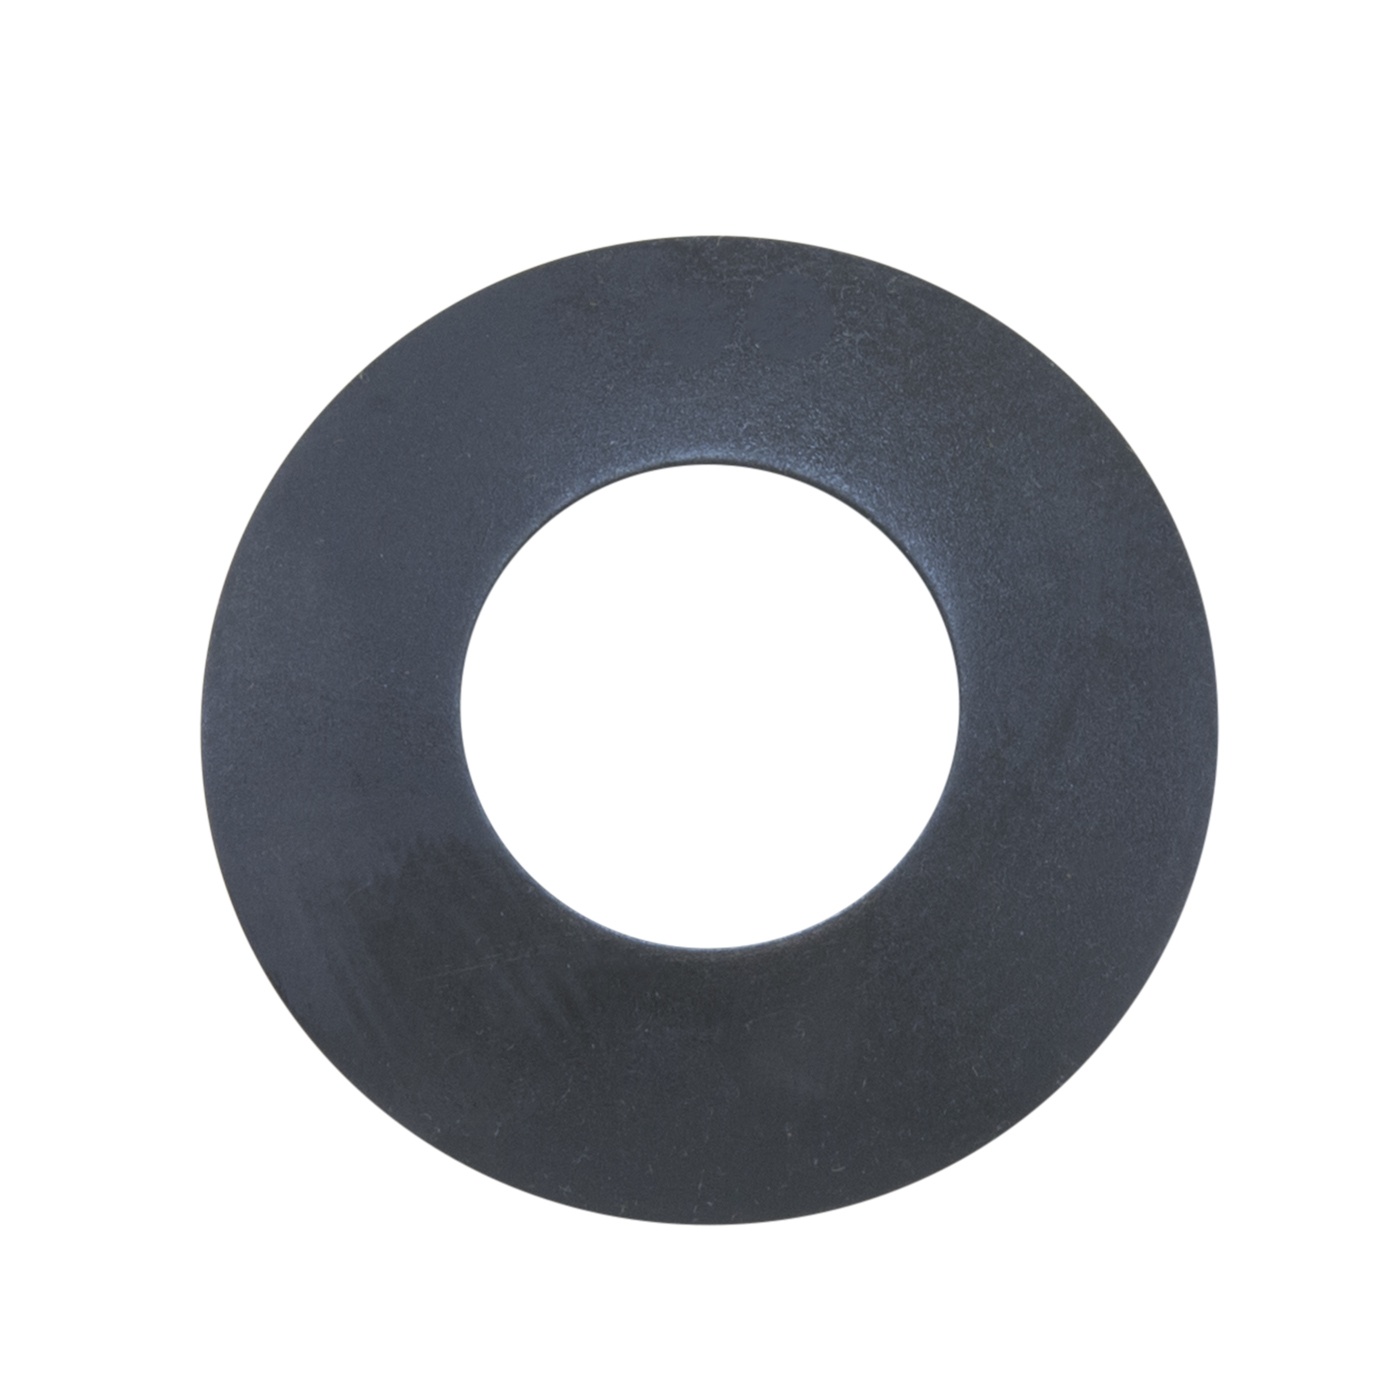 Replacement pinion gear thrust washer for Spicer 50 